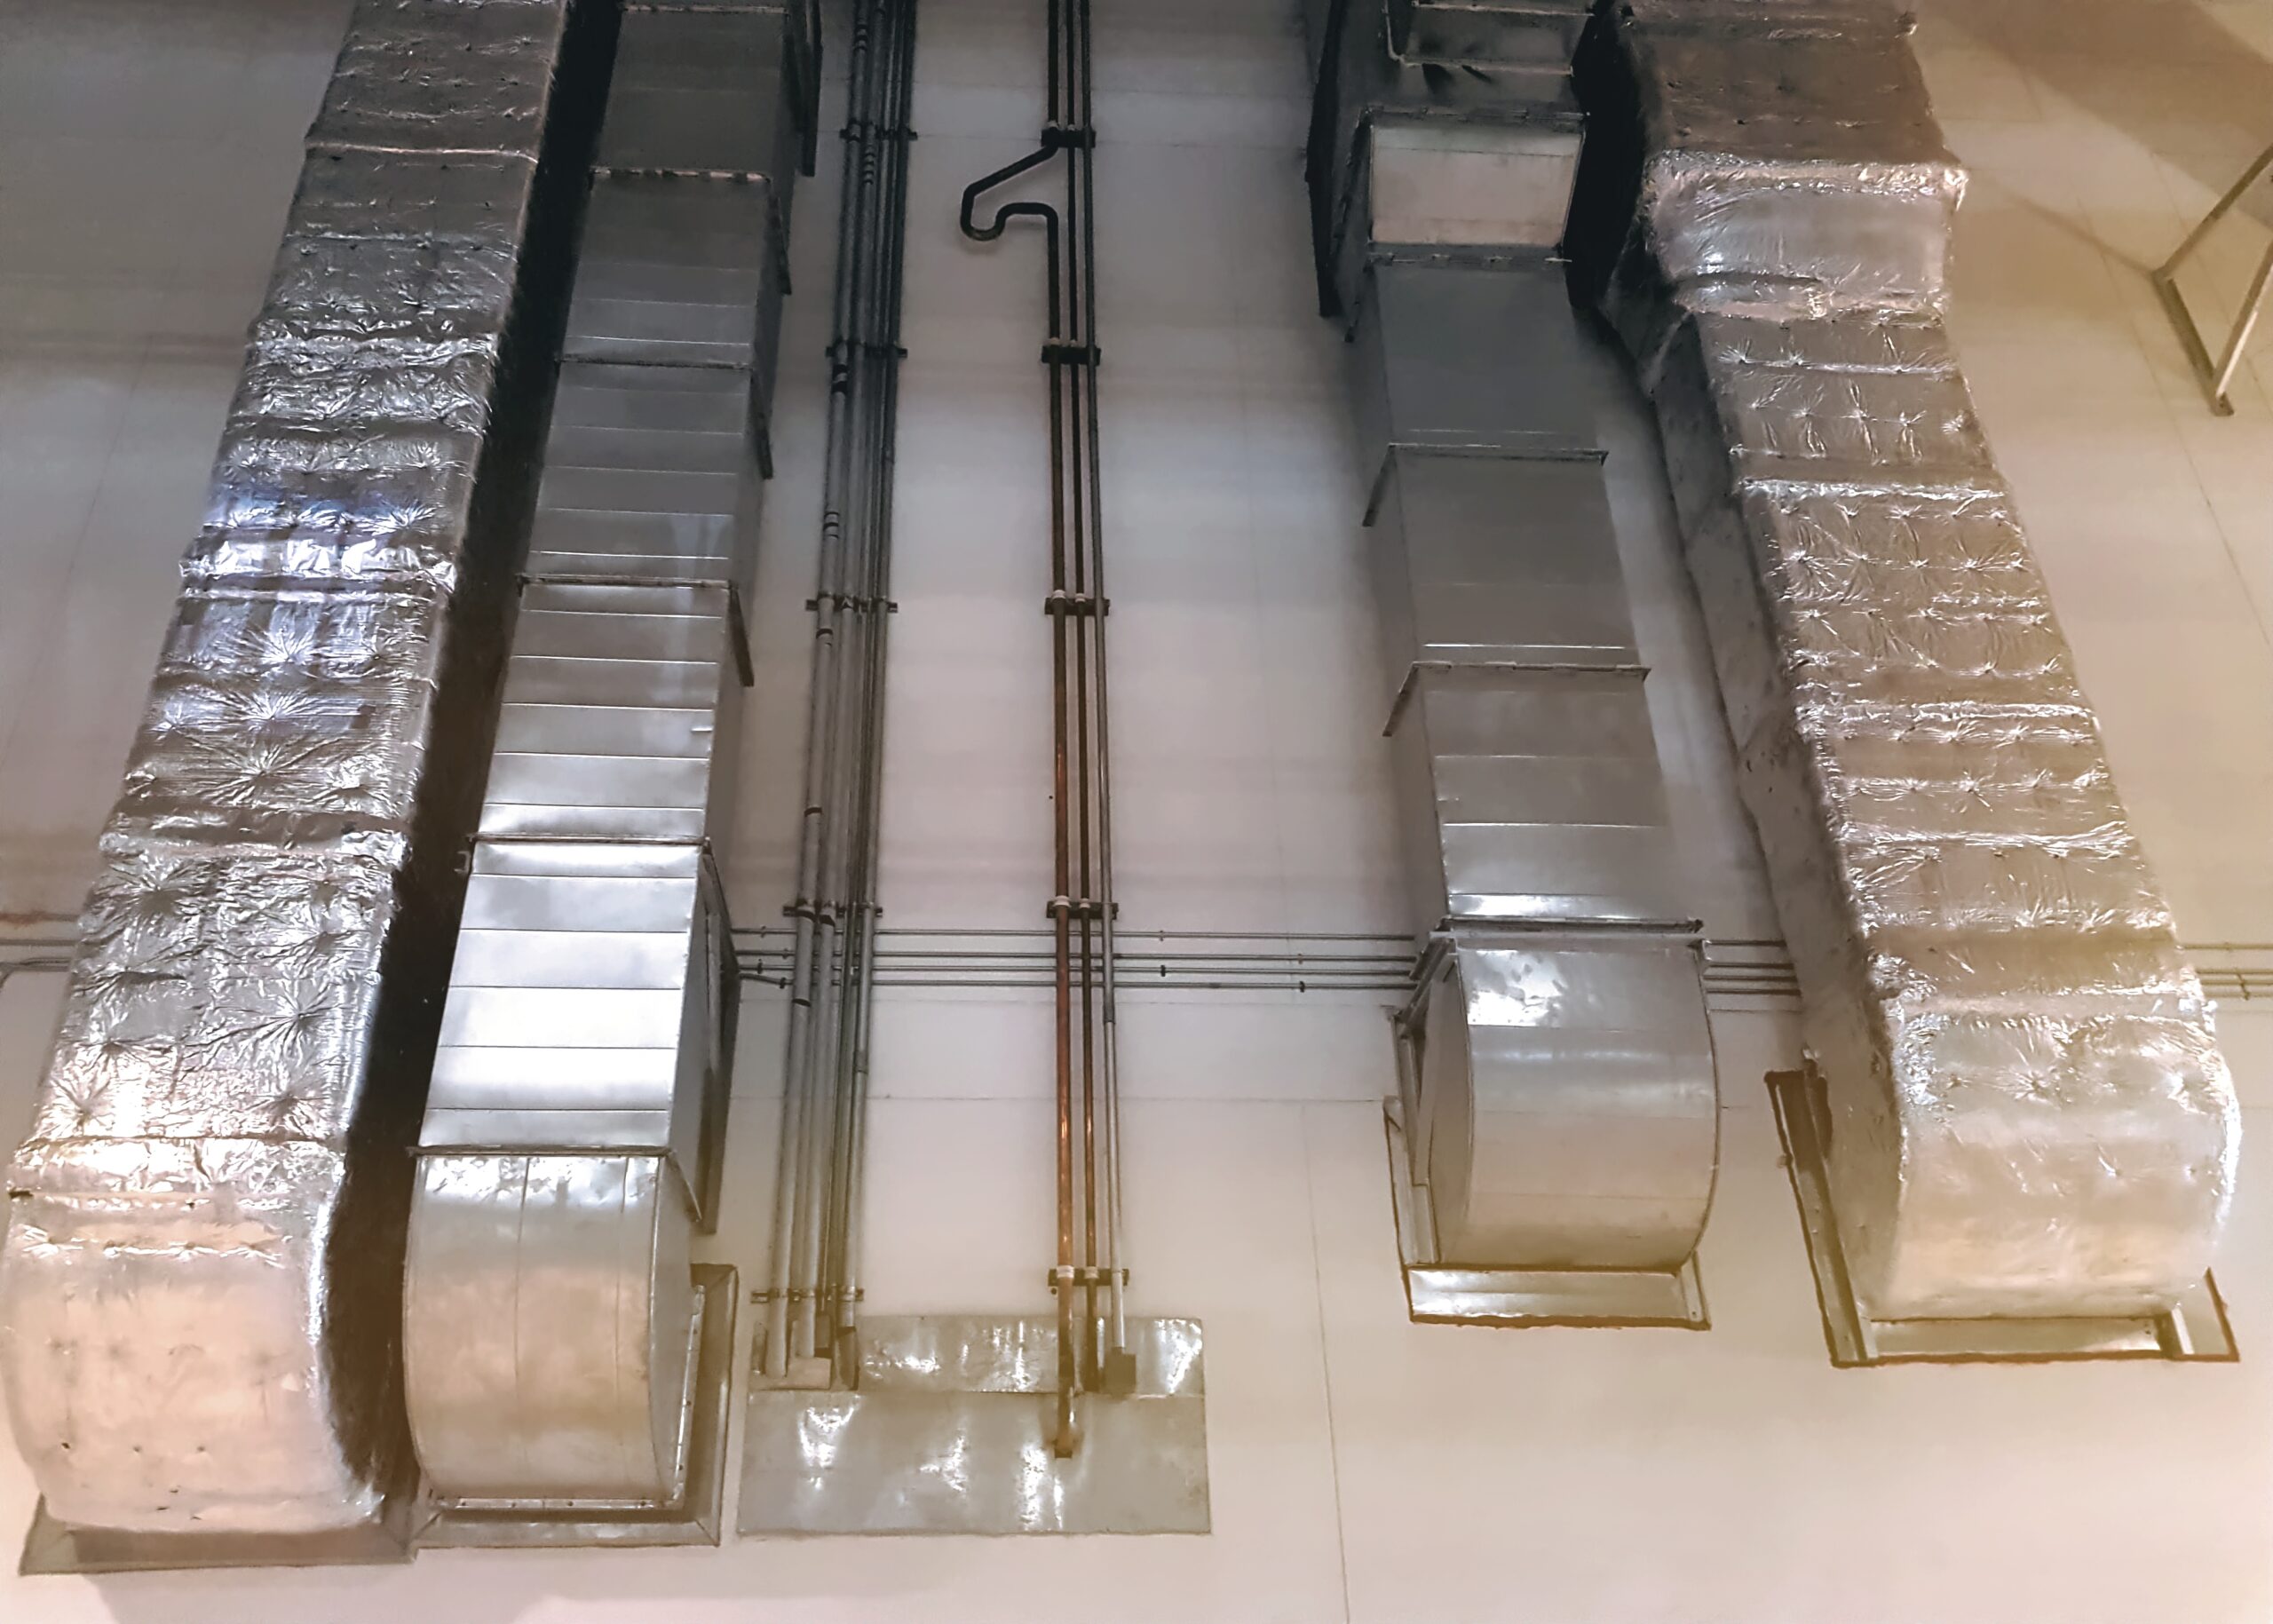 Air Ducts and Piping of Air Conditioning System